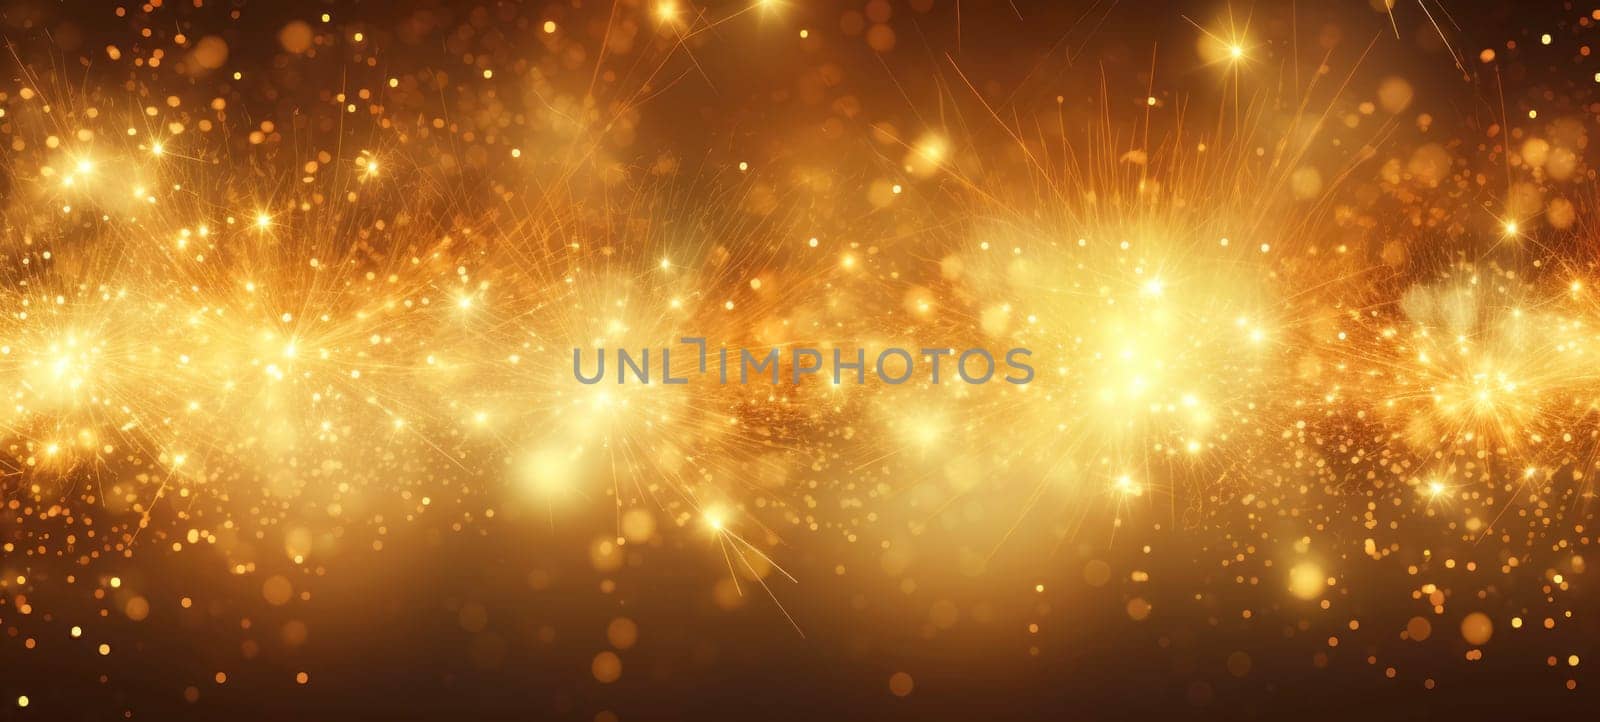 Abstract background with golden fireworks, sparkles, shiny bokeh glitter lights by andreyz